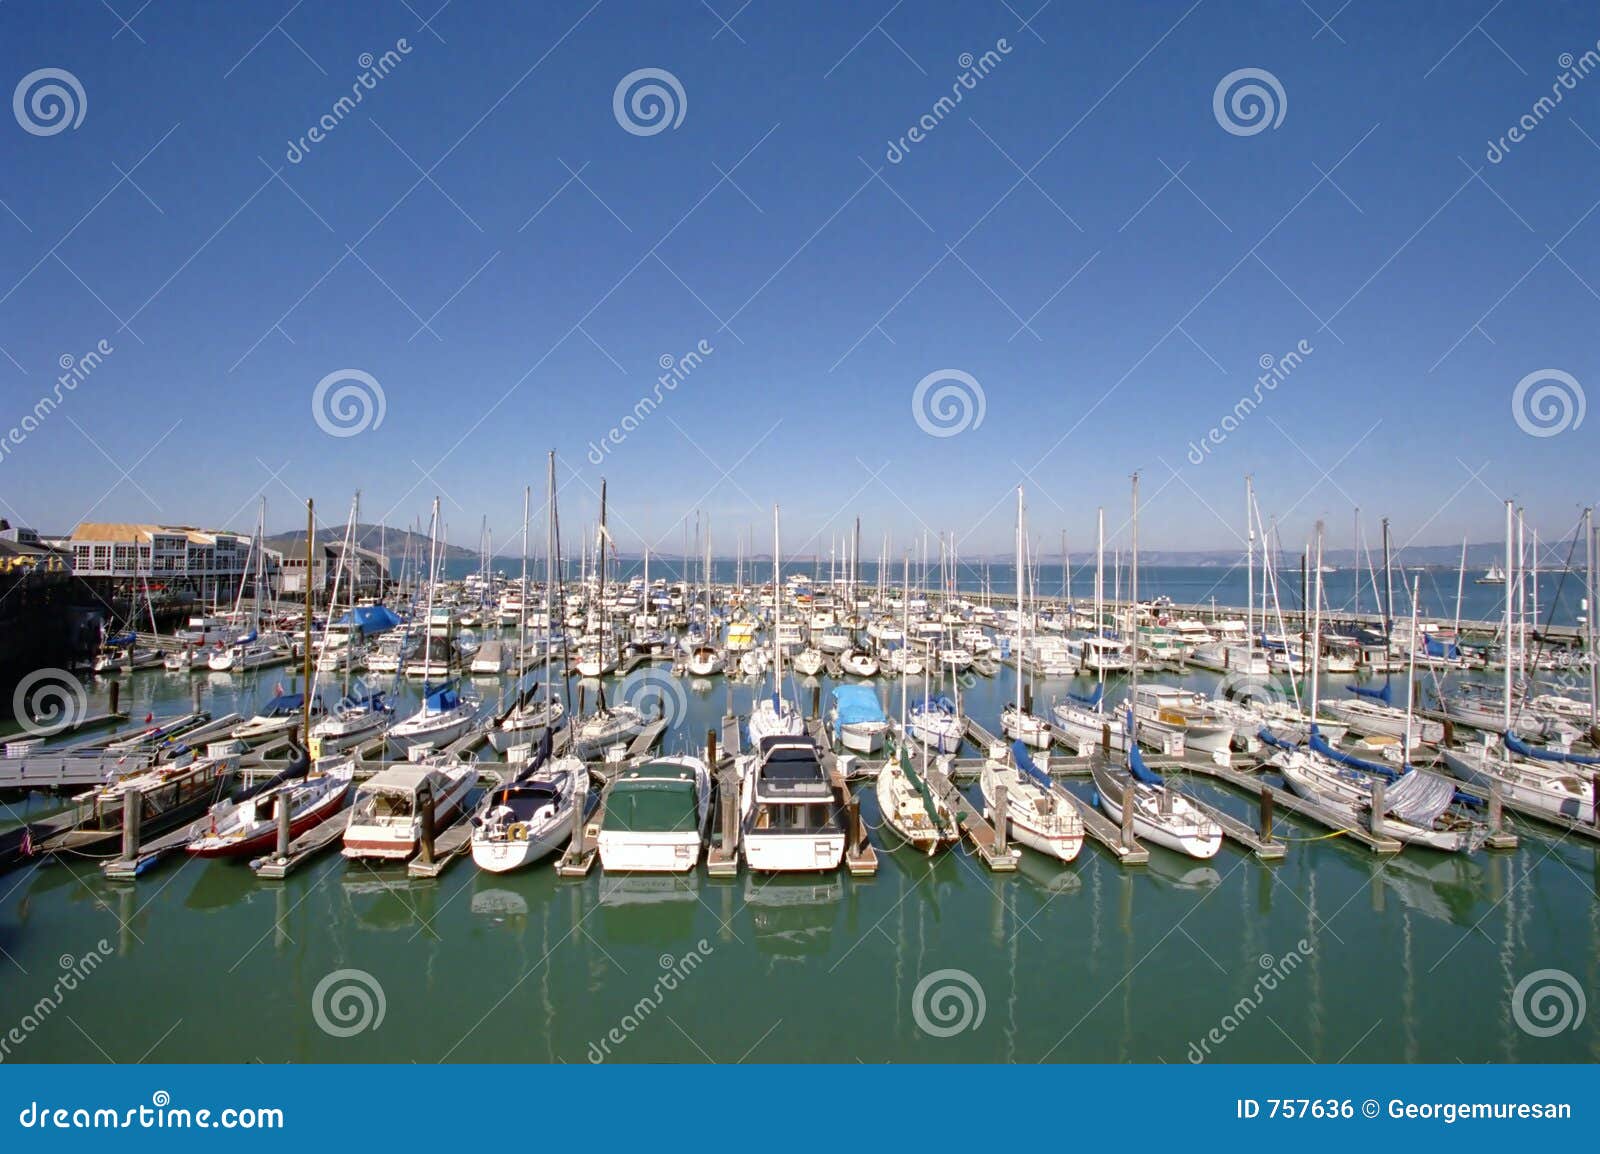 Army of yachts stock photo. Image of vessel, marine, harbor - 757636